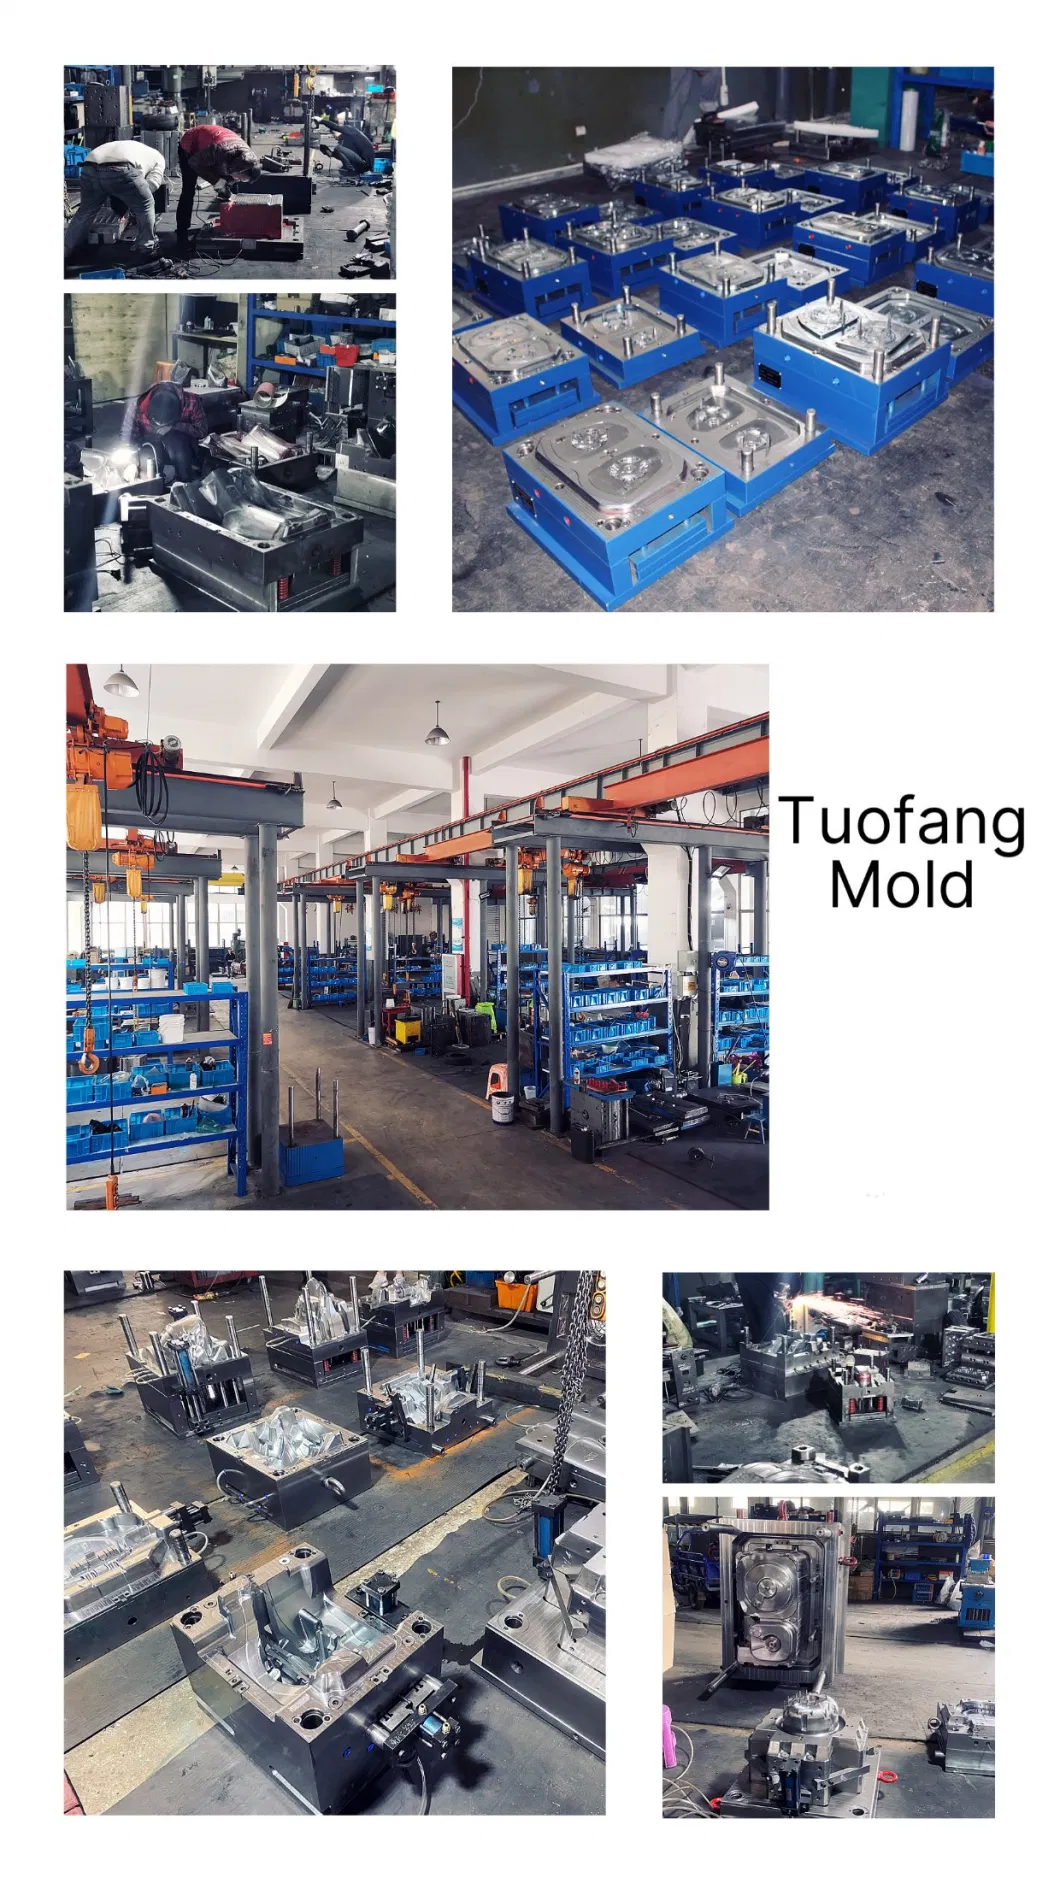 Automotive Engine Injection Water Tank Mould